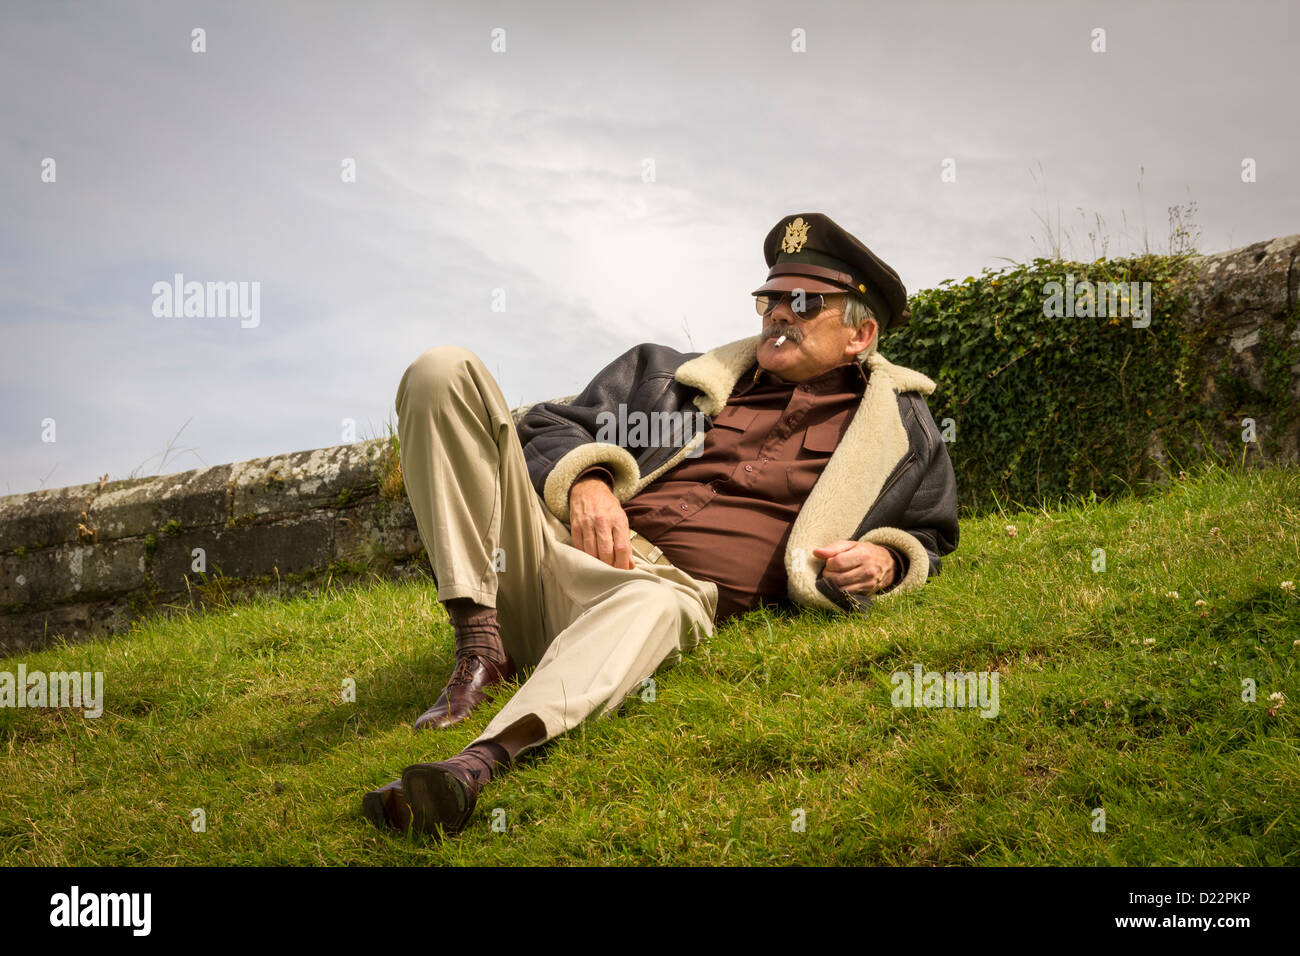 Air Force Pilot in Vintage Costume with cigarette on grass. Stock Photo